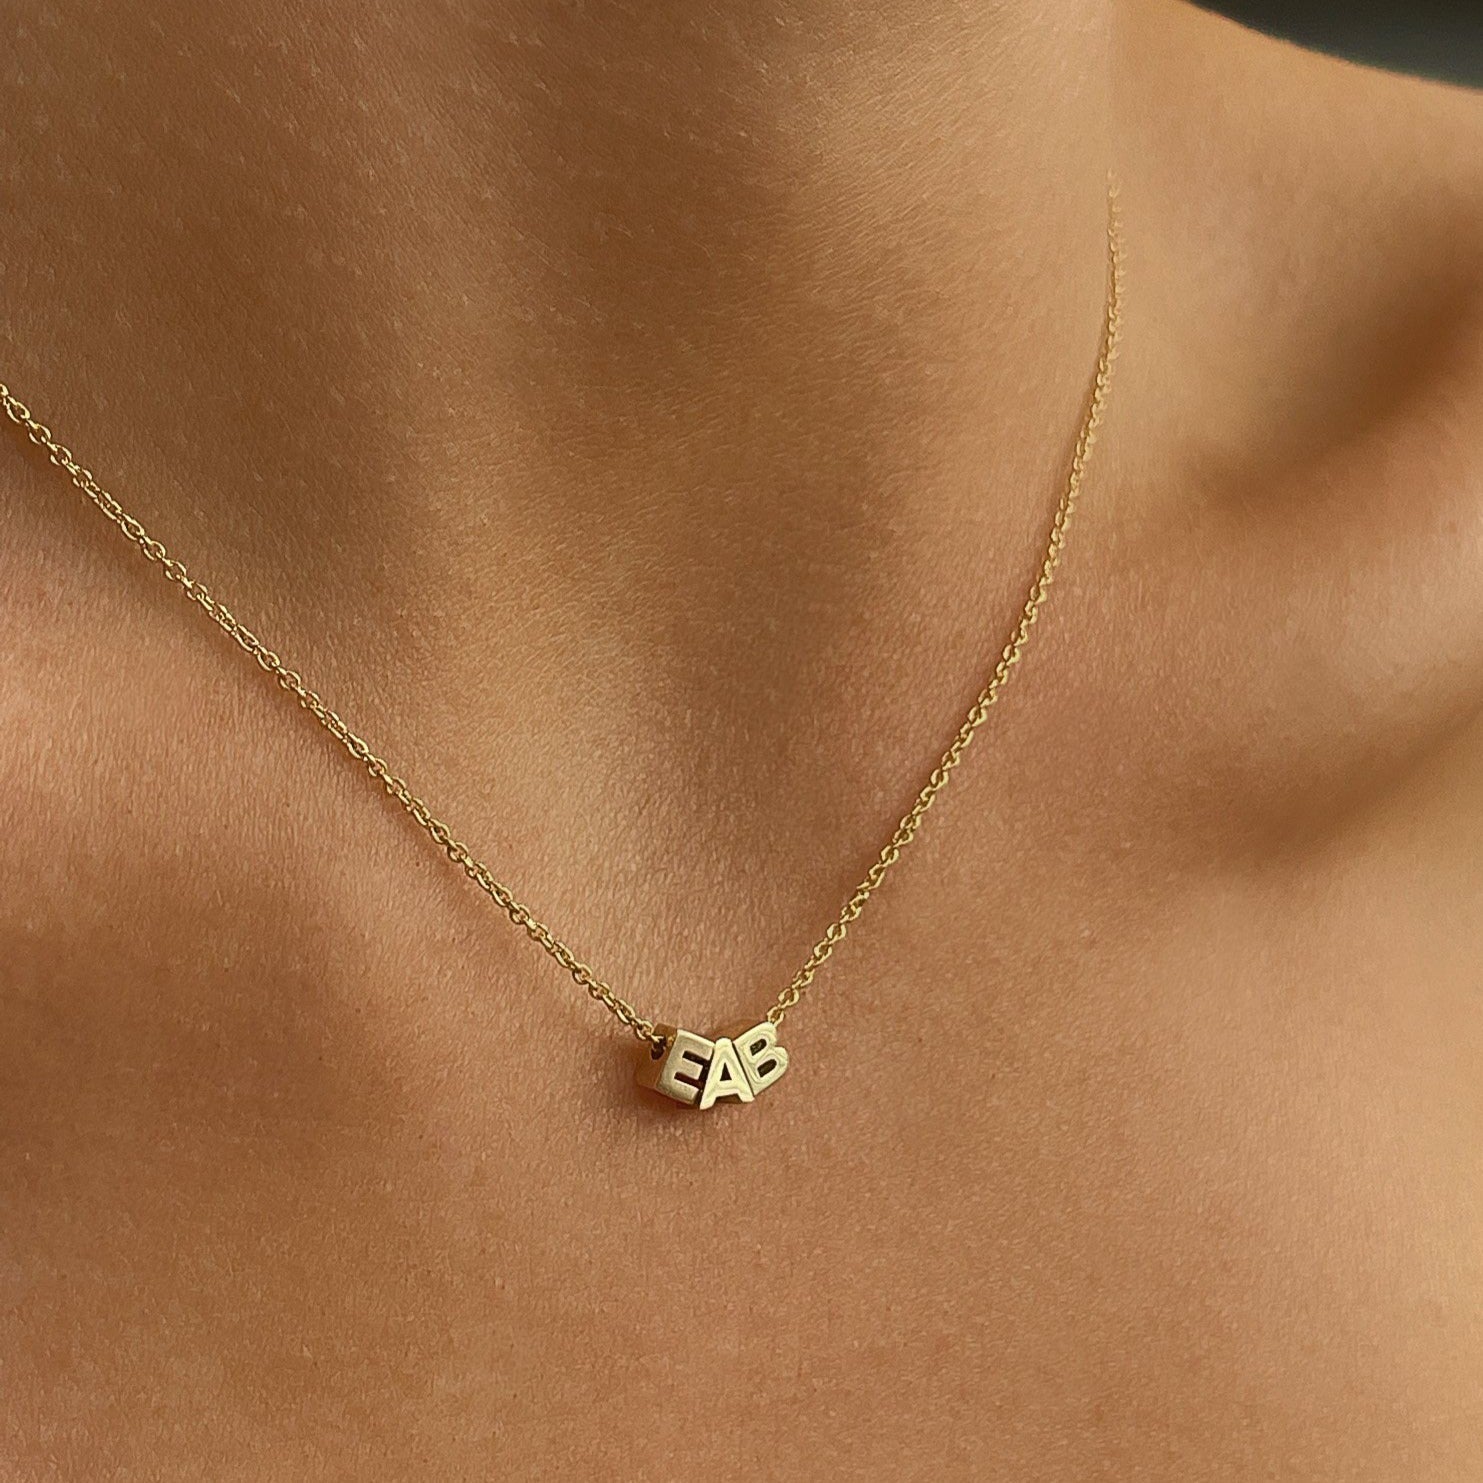 Personalized Tiny Initial Necklace